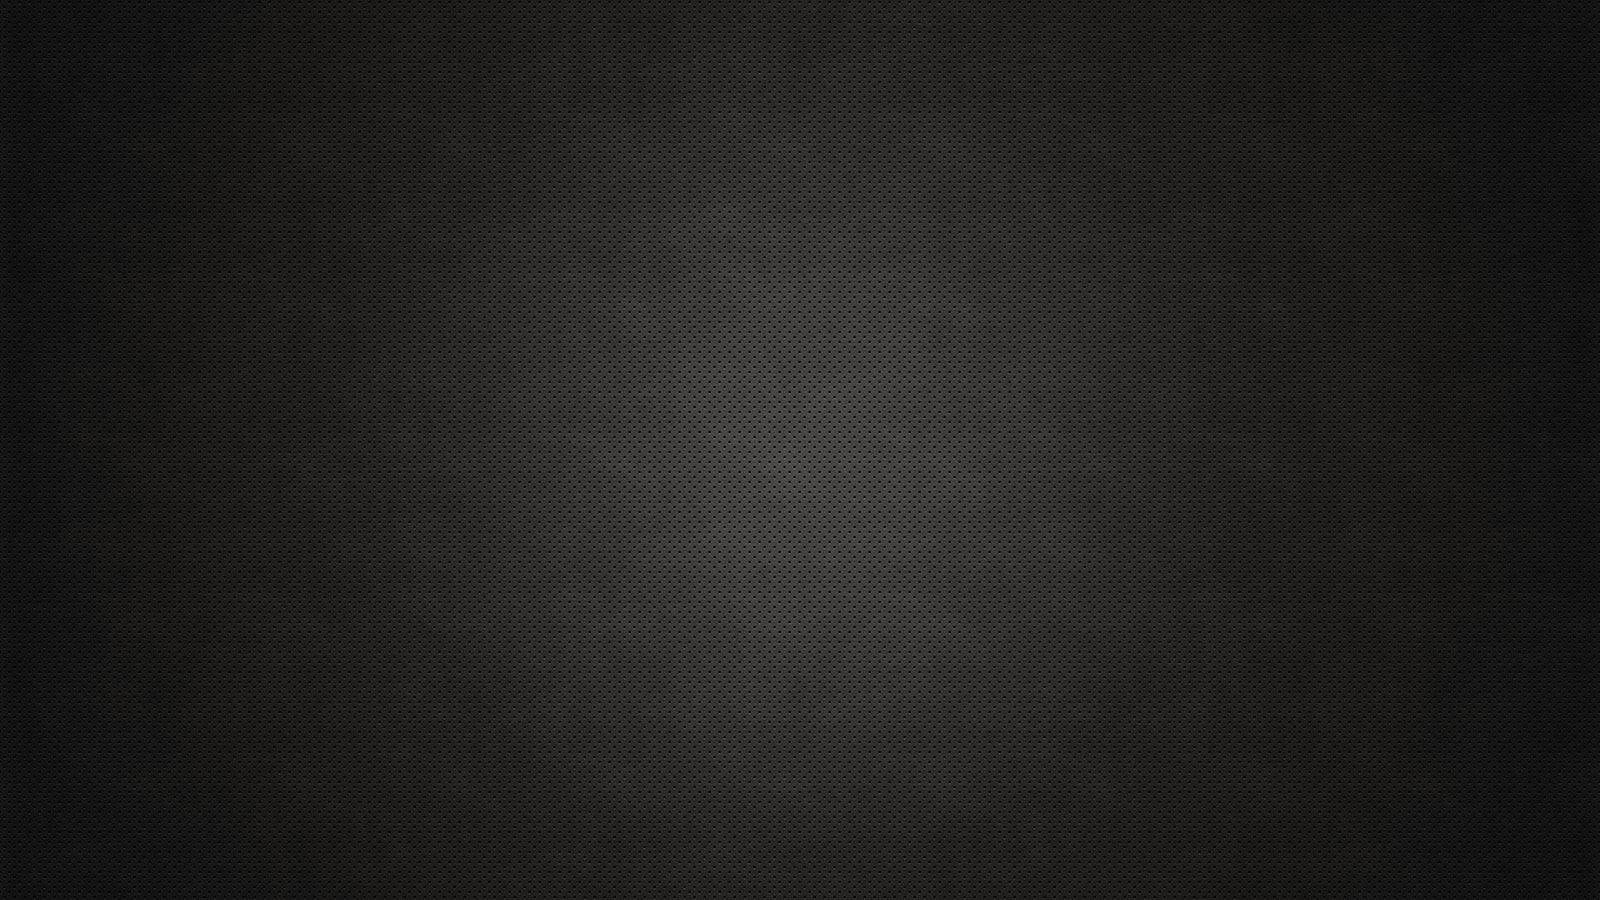 Wallpapers For > Solid Black Wallpapers 1920x1080